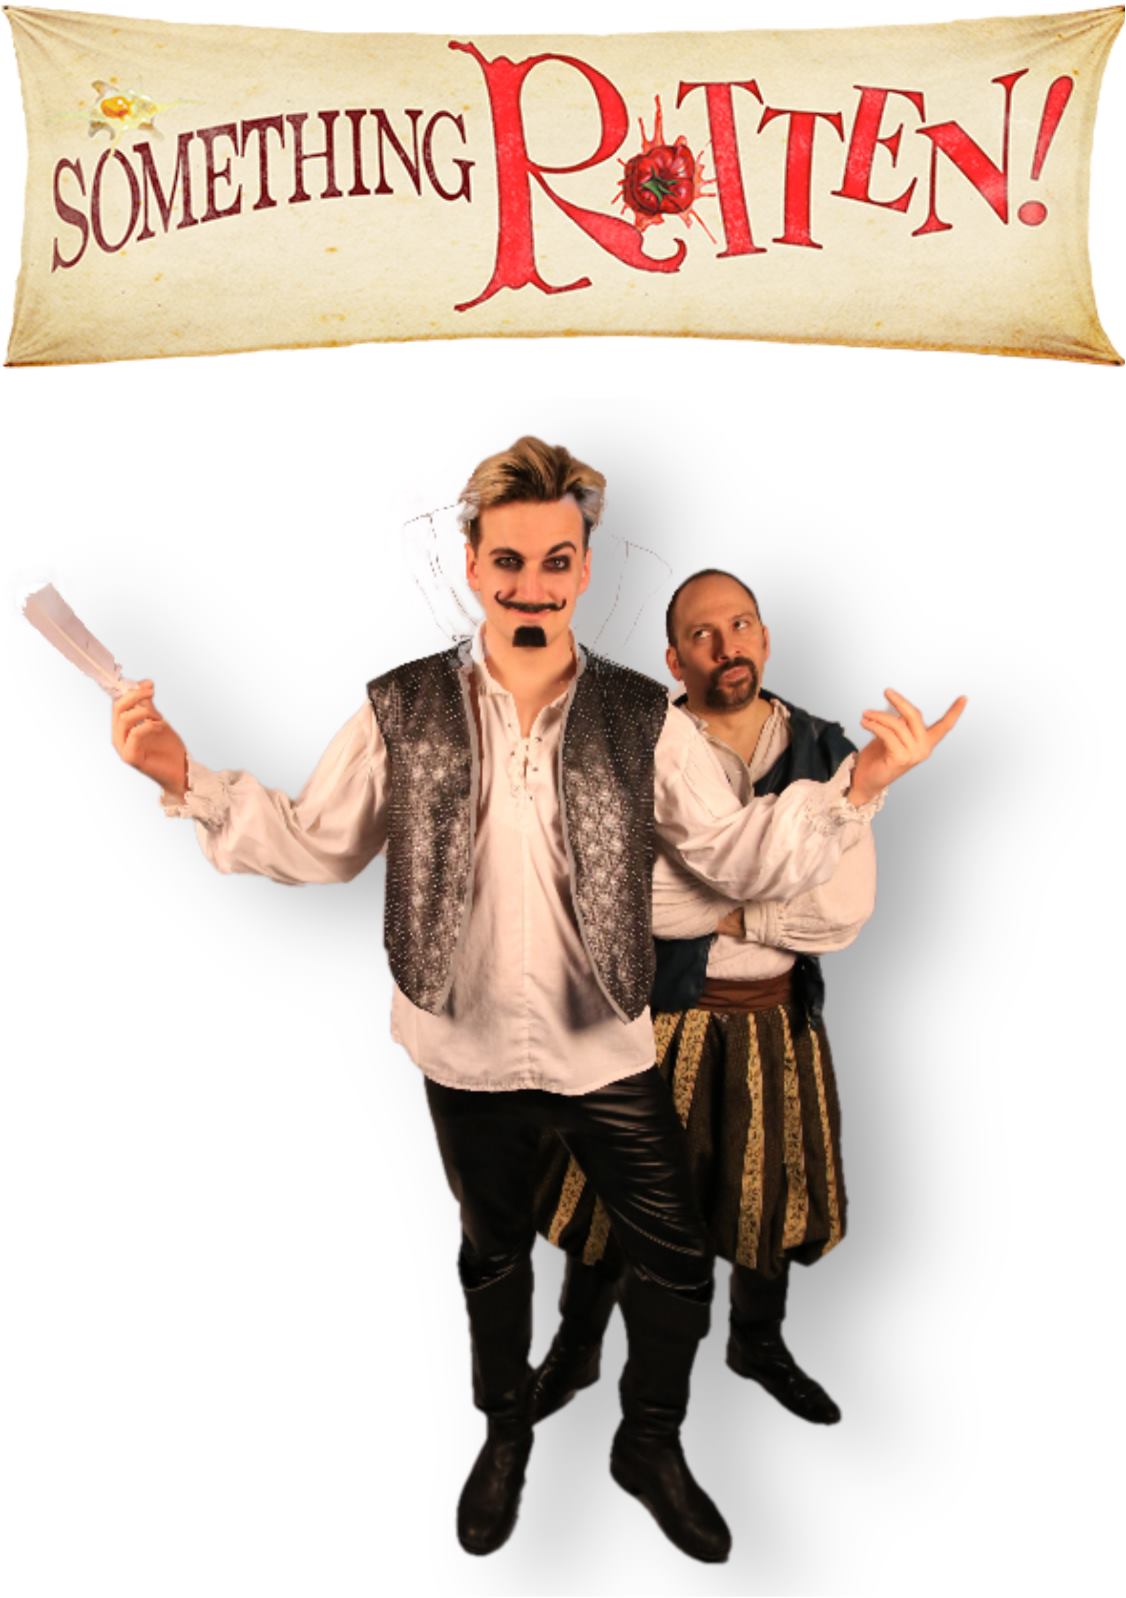 “Something Rotten!” presented by Theatre Nebula featuring (left to right) Cale Singleton (William Shakespeare) and David Pfenninger (Nick Bottom).
